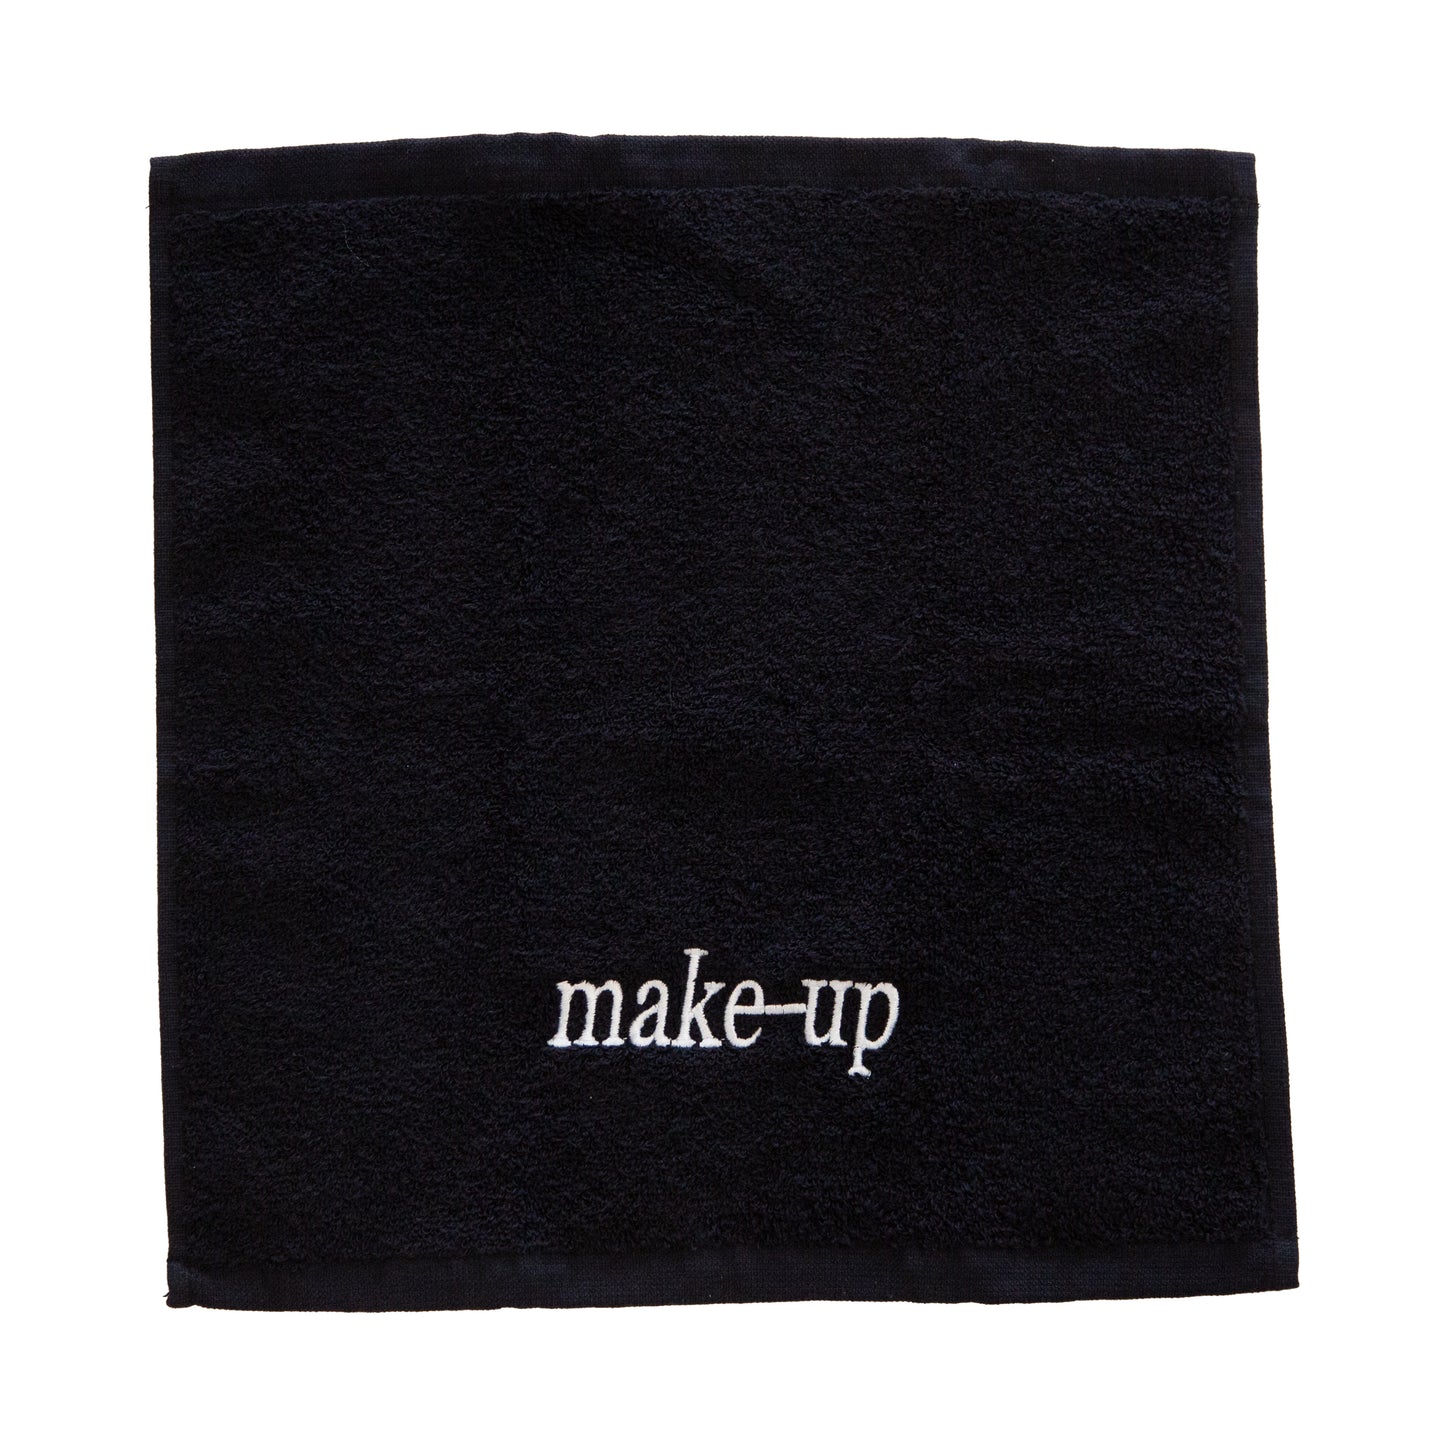 Luxury Face Cloth "Make Up" 550 GSM 100% Cotton